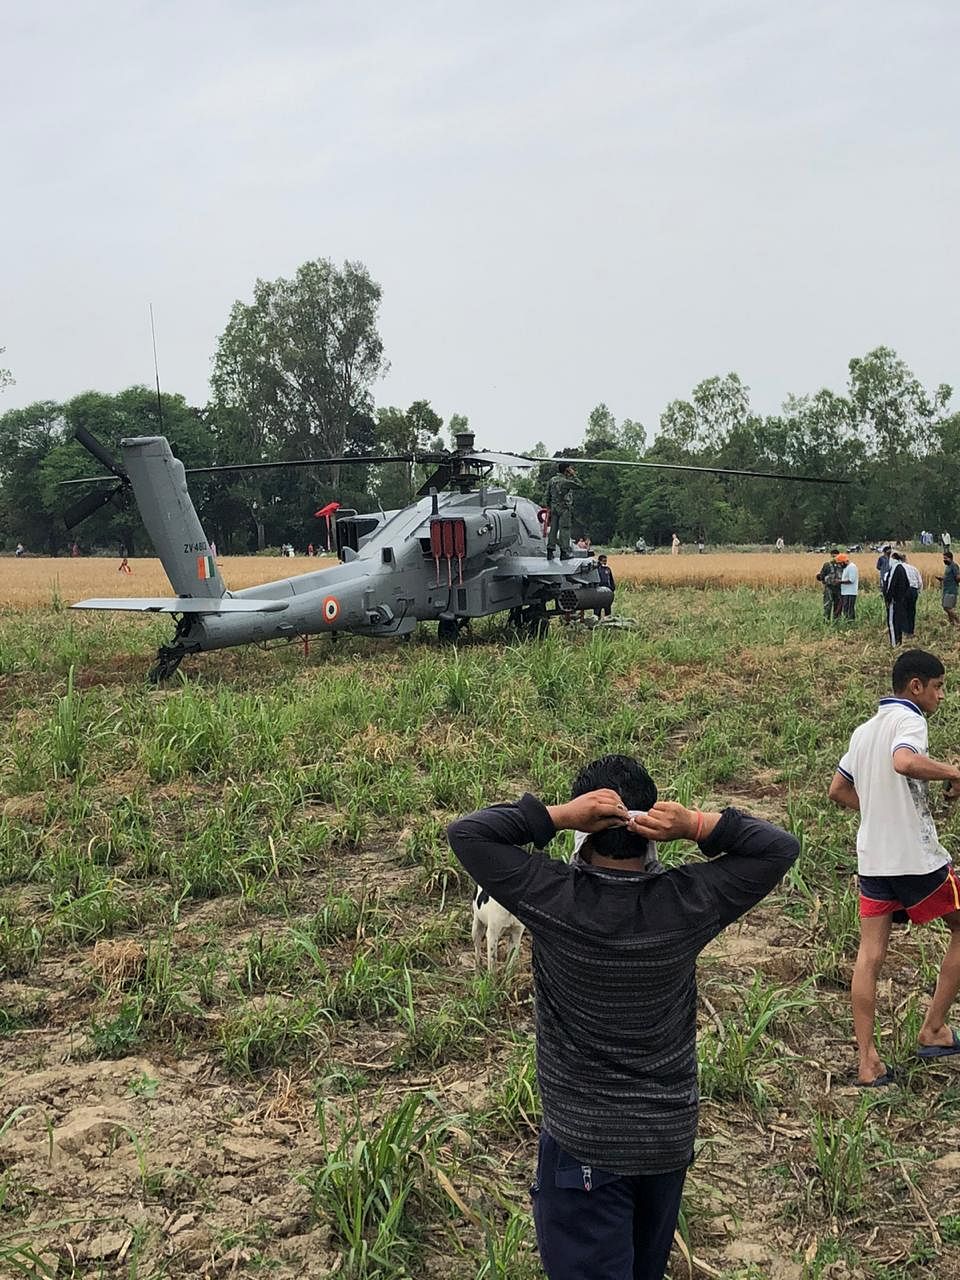 An IAF Apache helicopter made an emergency landing in a field in Punjab (DH Photo)